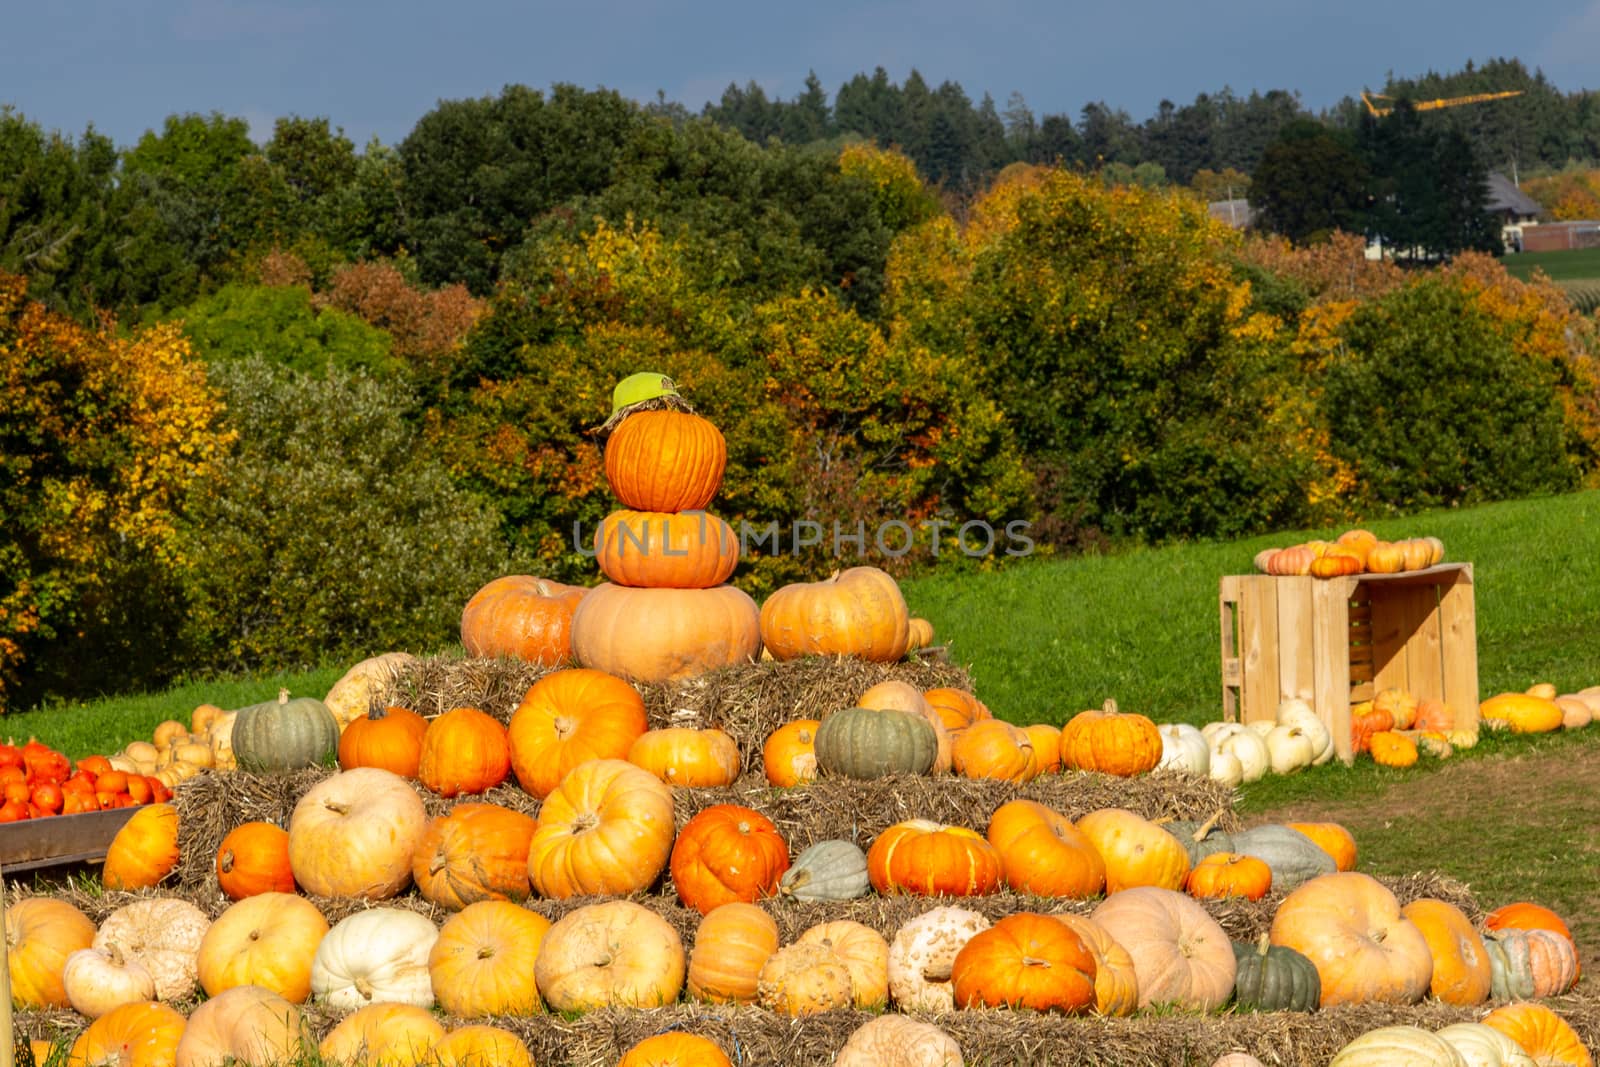 Pumpkins of different colors piled up on a meadow in the black forest